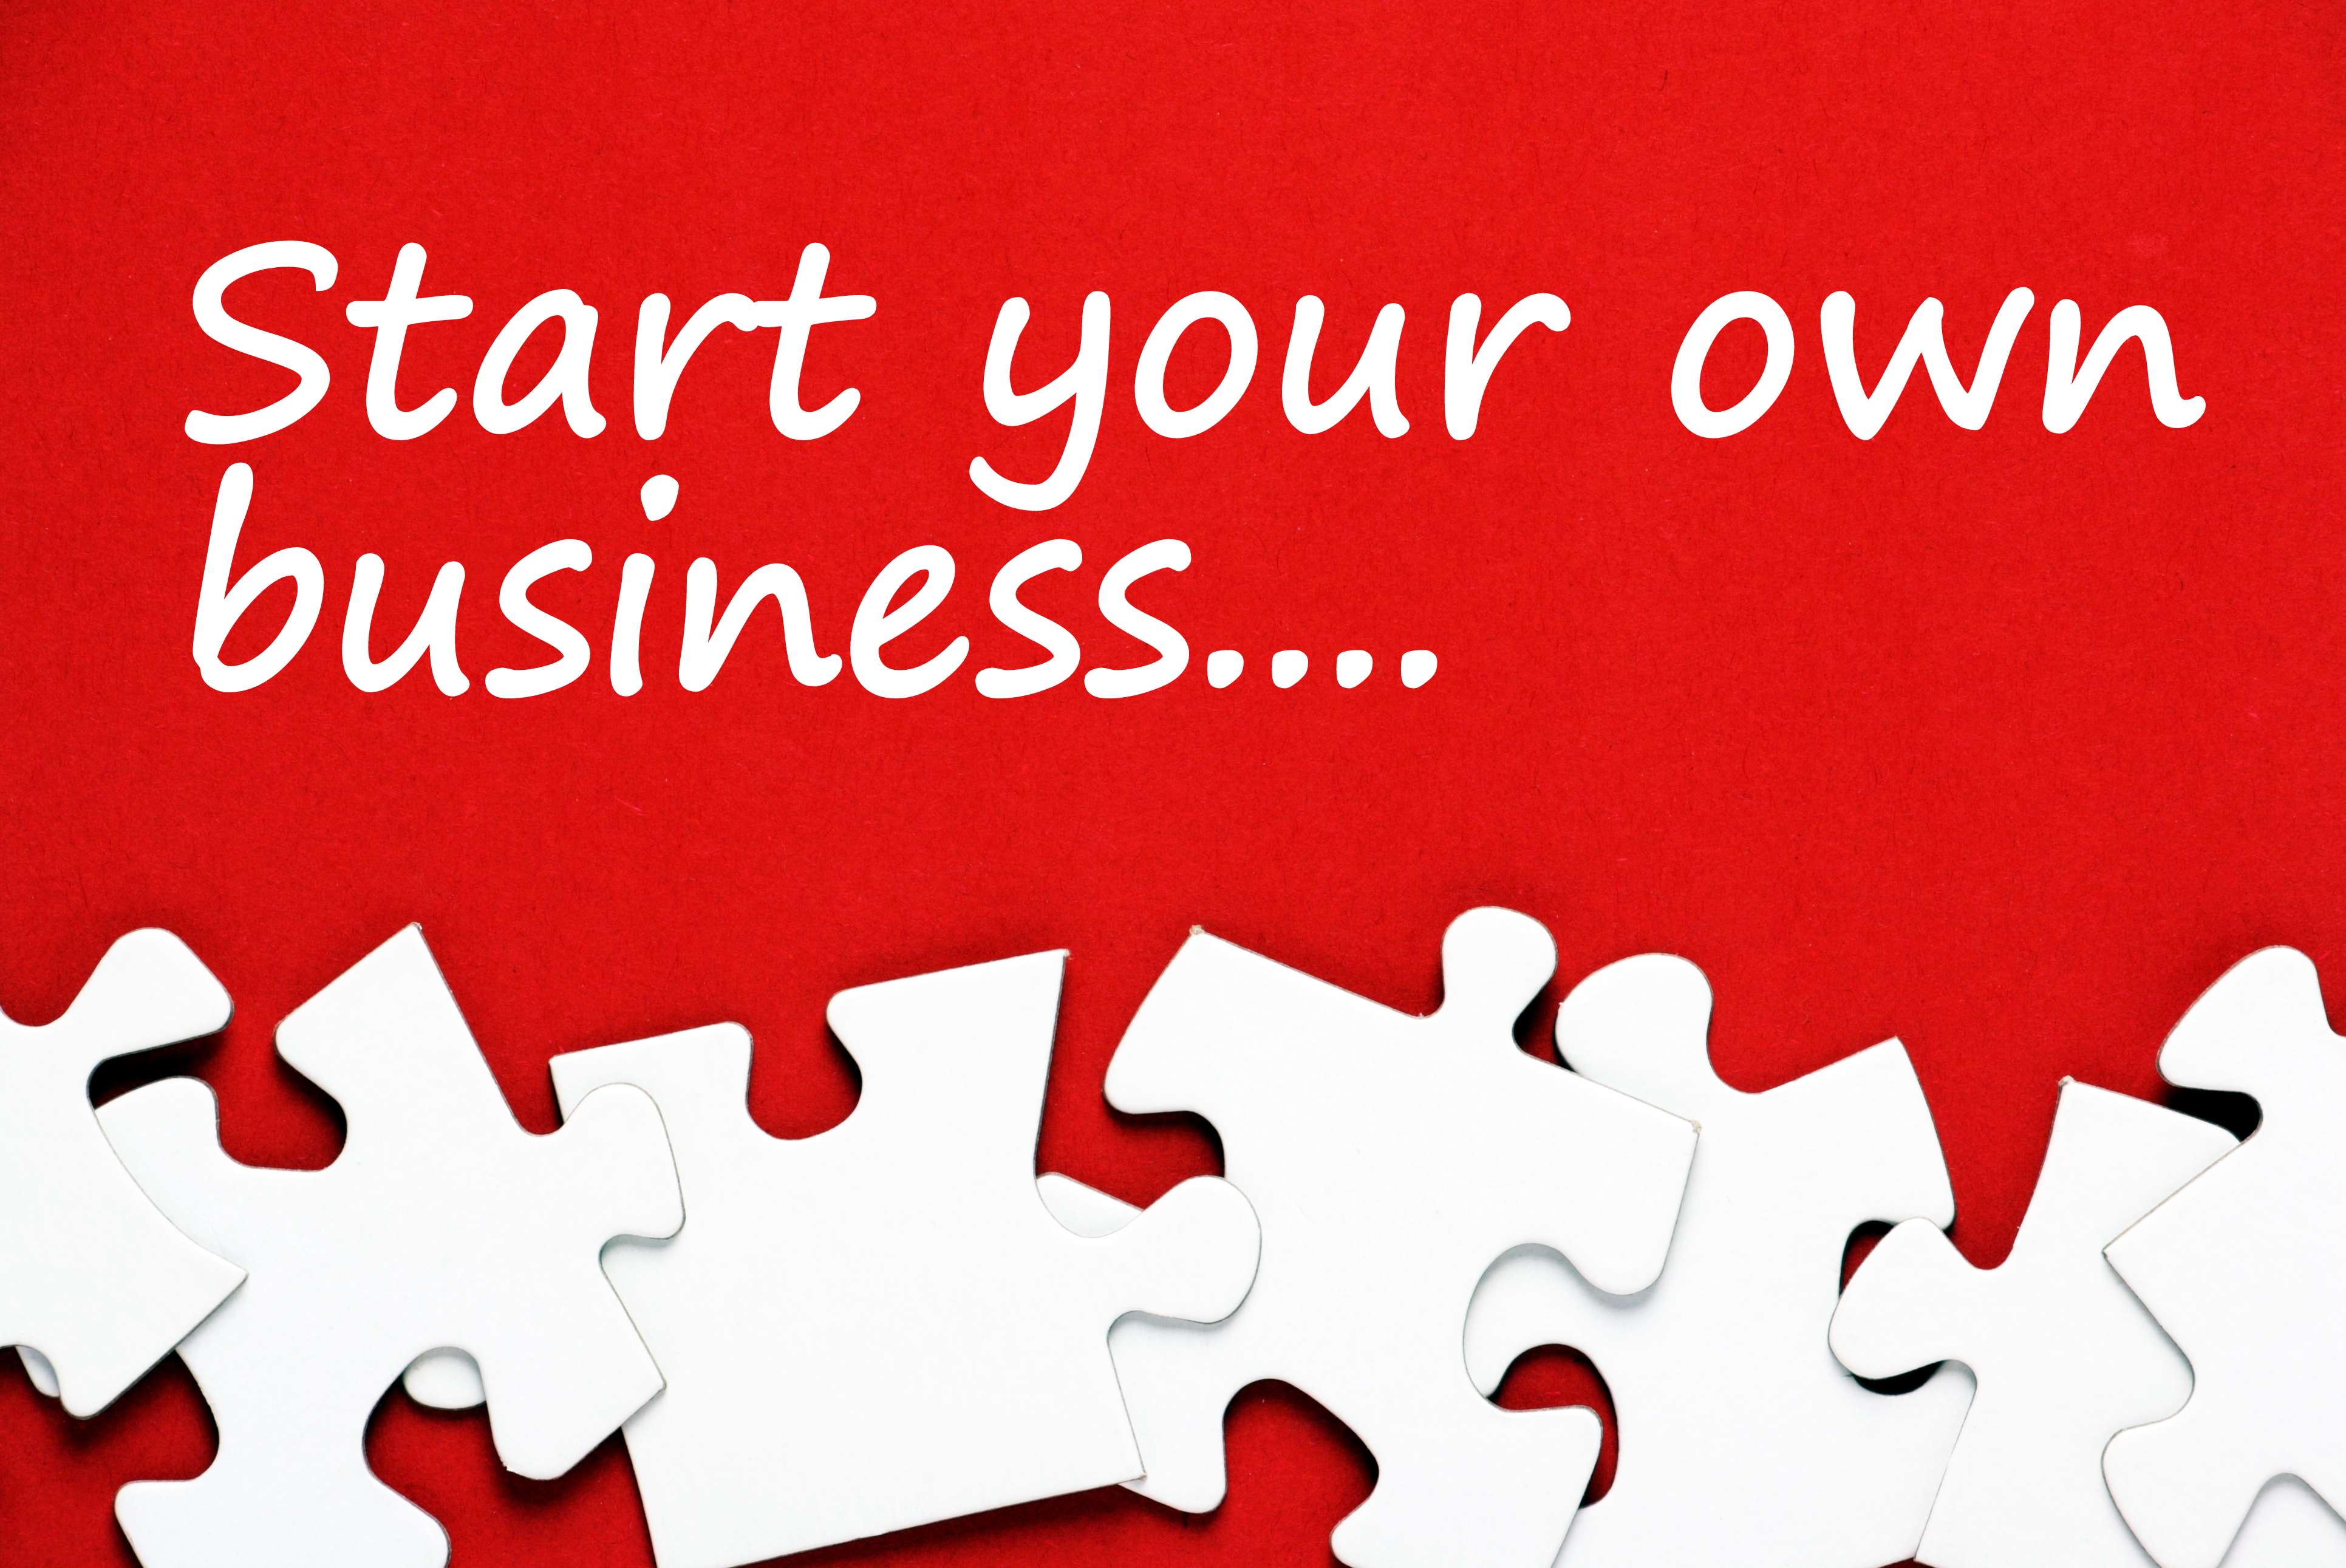 Are ready to start. Start your own Business. How to start your own Business. Предложение с start your own Business. How to start my own Business.